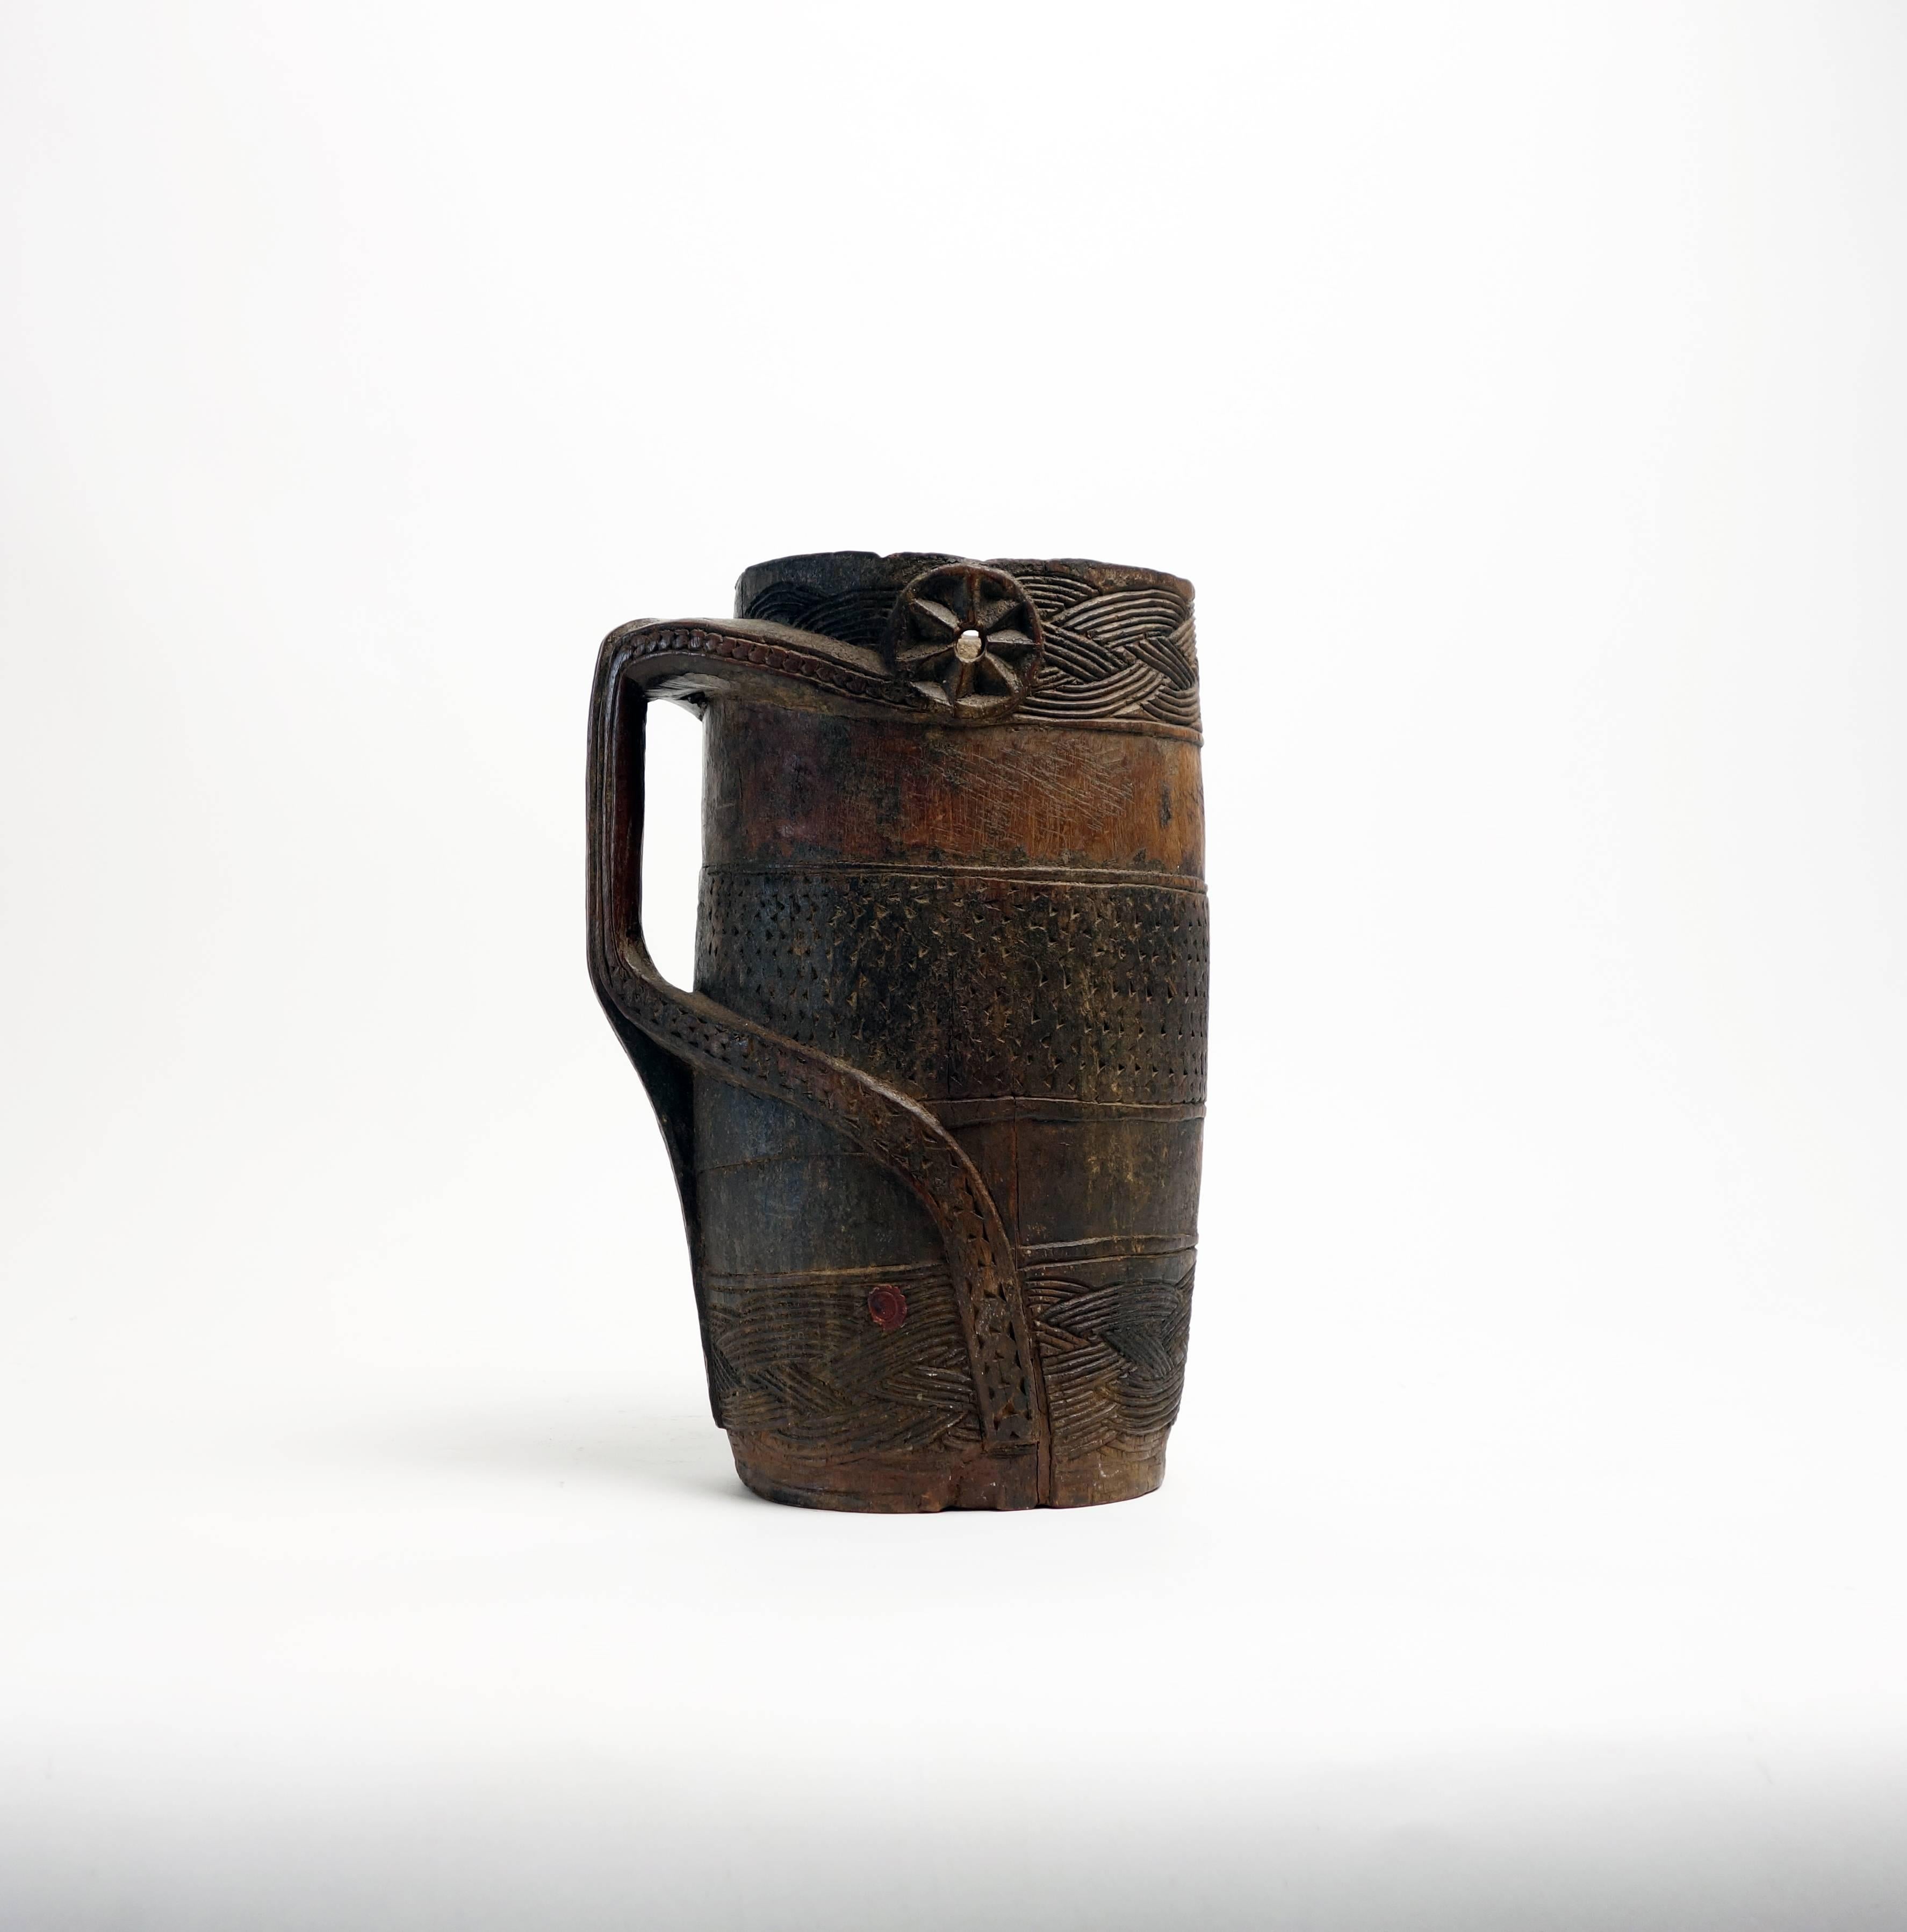 A ceremonial palm wine vessel of the Kuba peoples, carved in alternating horizontal bands of smooth wood and interlaced, abstract designs. The handle has an anthropomorphic quality. The Kuba take great care in the decoration of objects. Motifs are